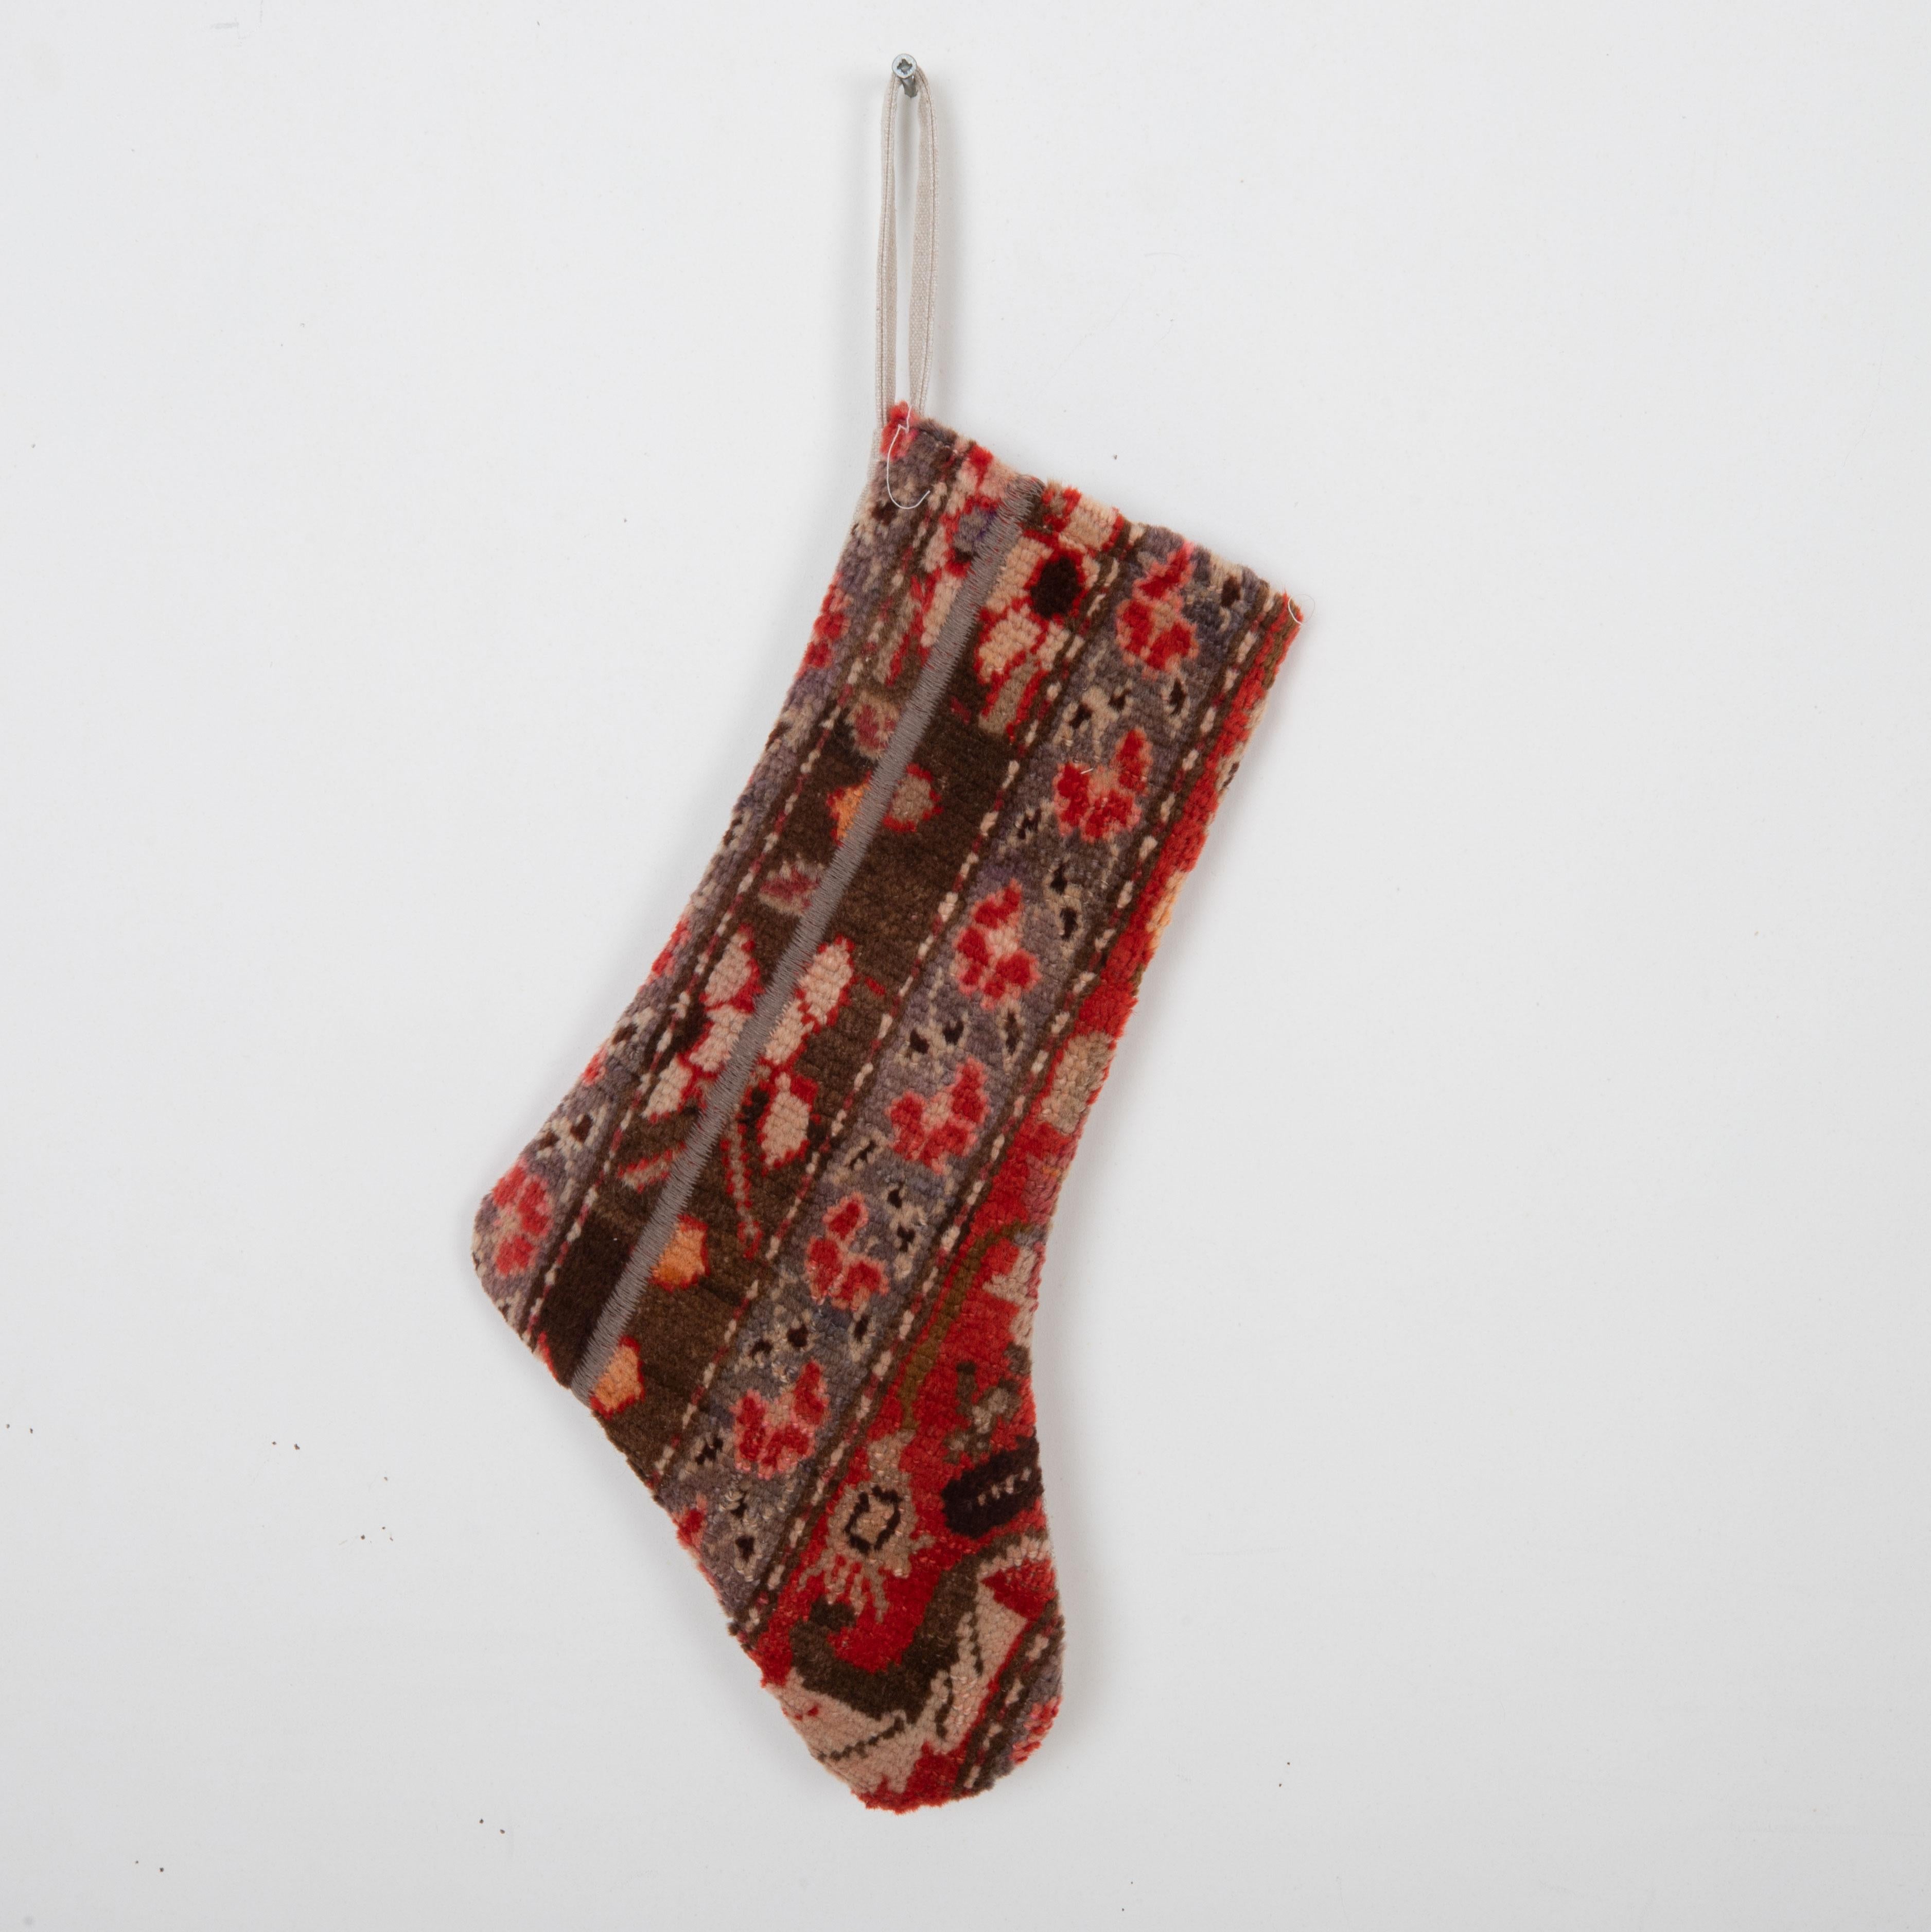 This Christmas Stocking was made from a late 19th or Early 20th C. Caucasian rug fragments.
Linen in the back.

Please note, this stocking was made from caucasian rug fragments.
